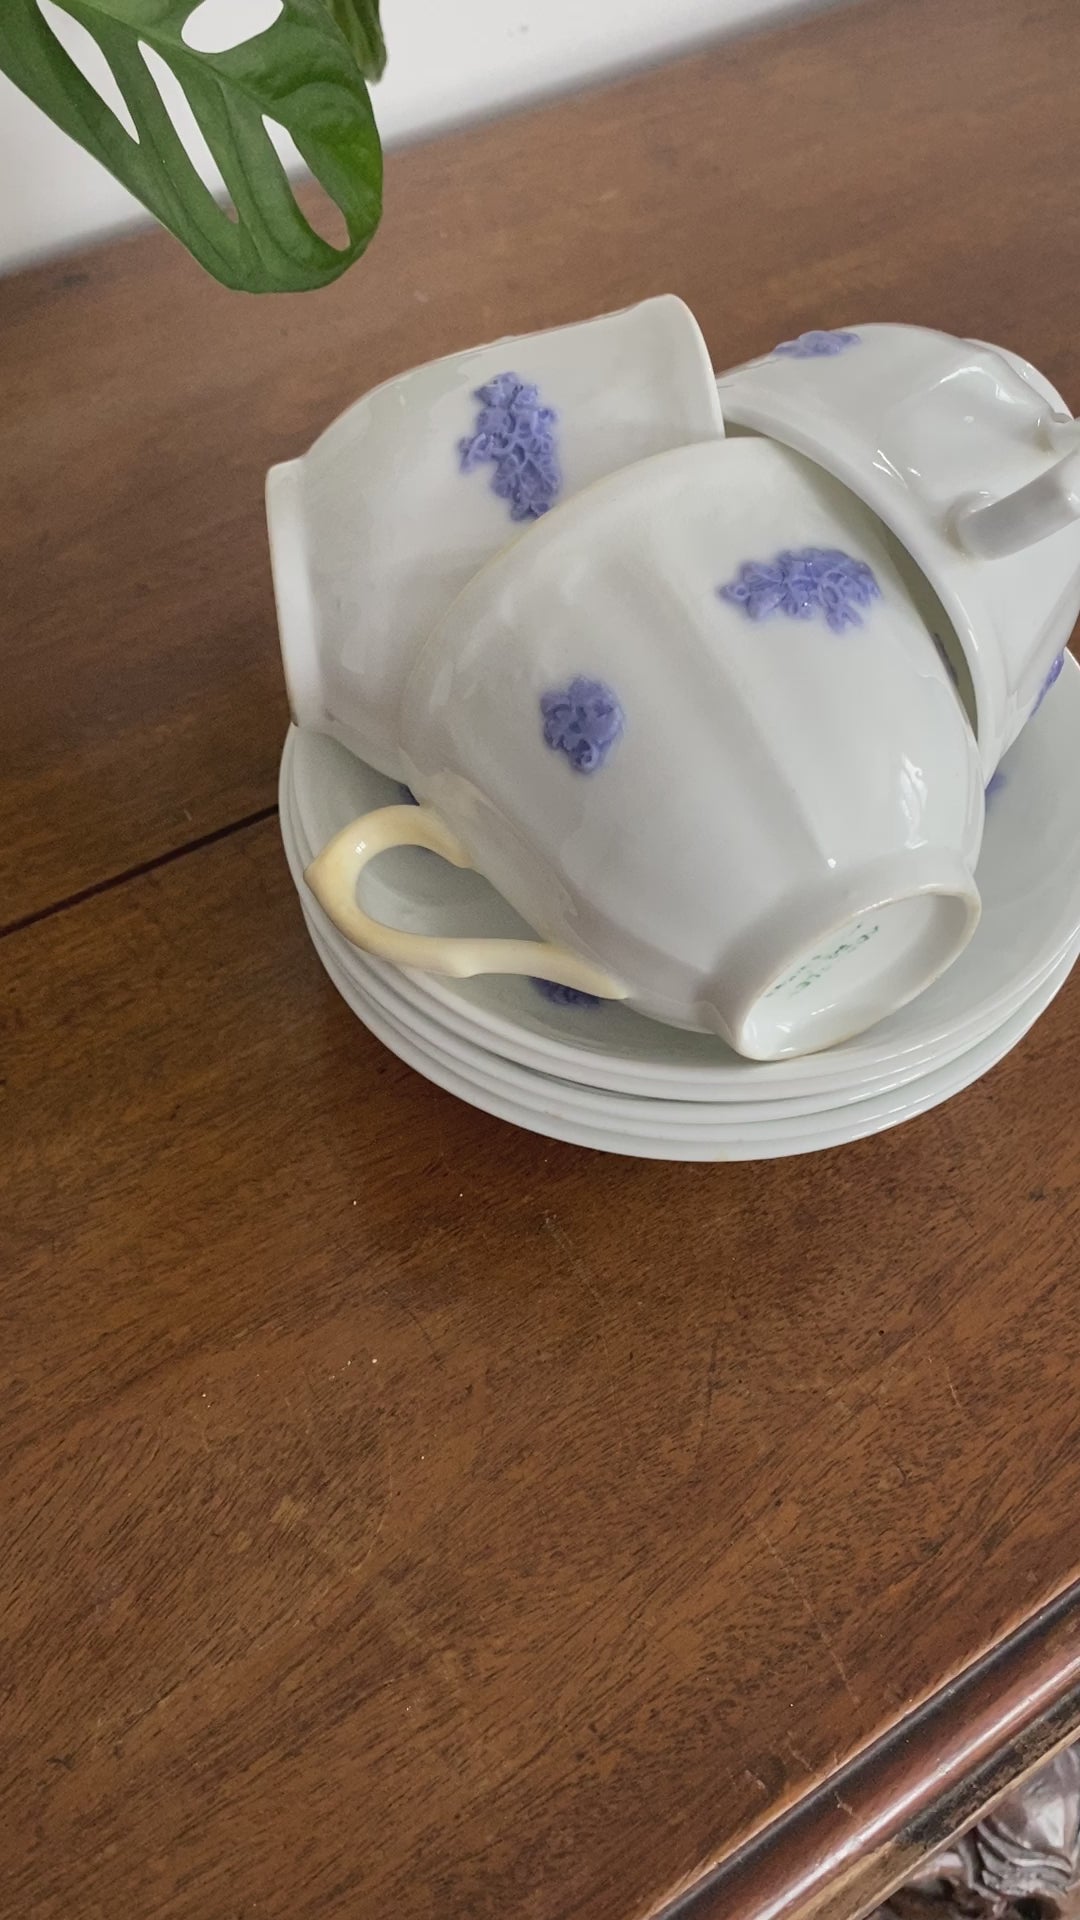 There are three teacups stacked on the saucers within eachother on a wooden table. The teacups are all upright but the handle is facing separate directions. The teacups are on the saucers and show the blue or violet colours. The woman pulls one teacup out to show it off. 